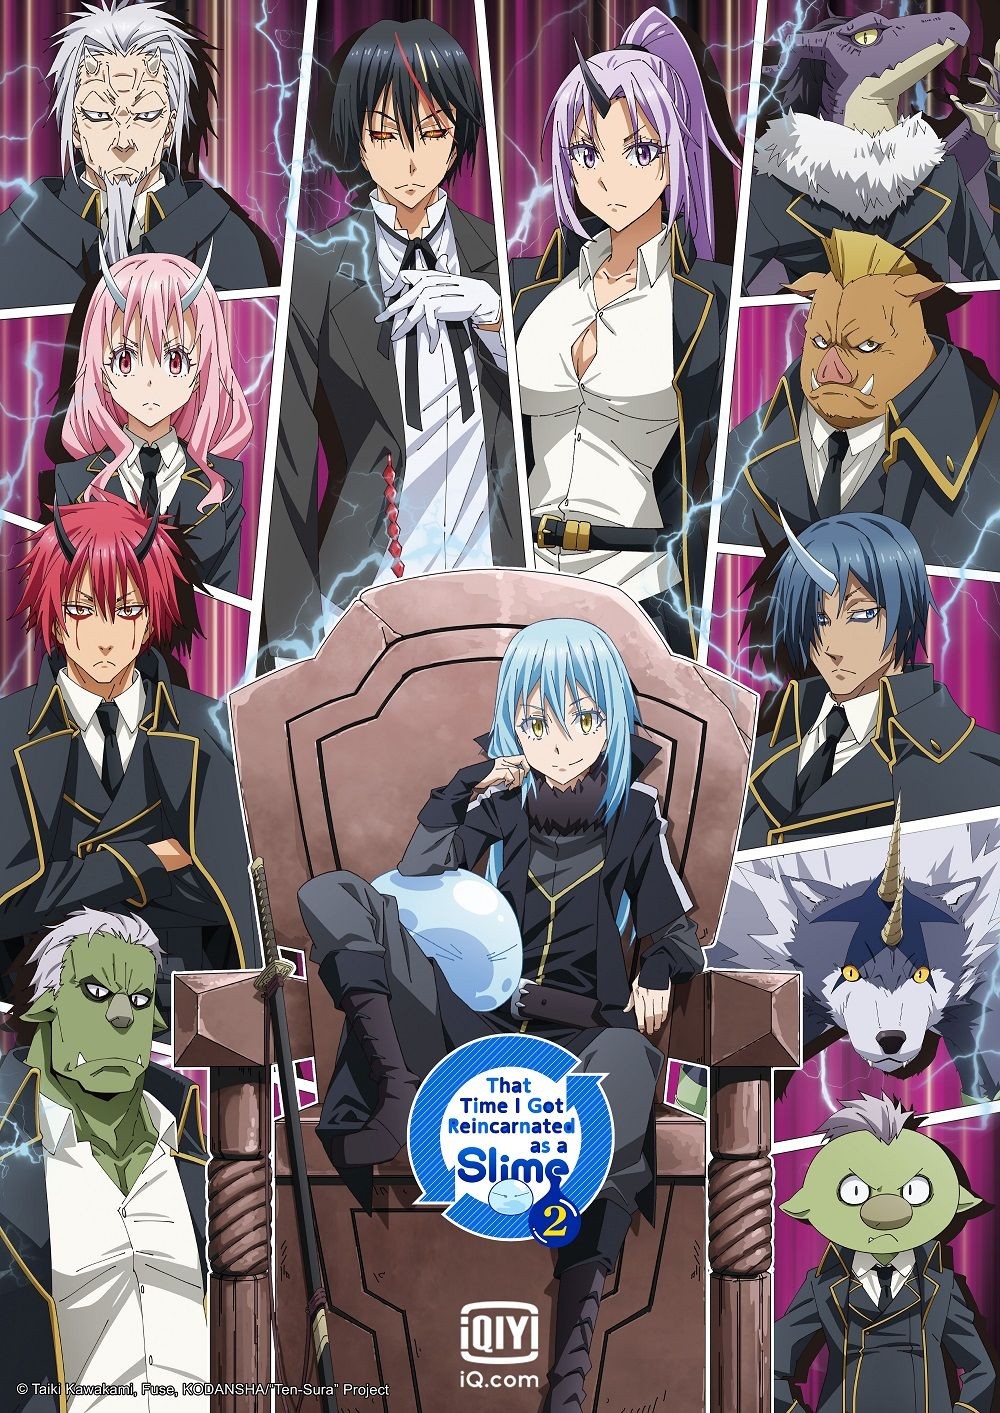 That Time I Got Reincarnated as a Slime Part 2.jpg